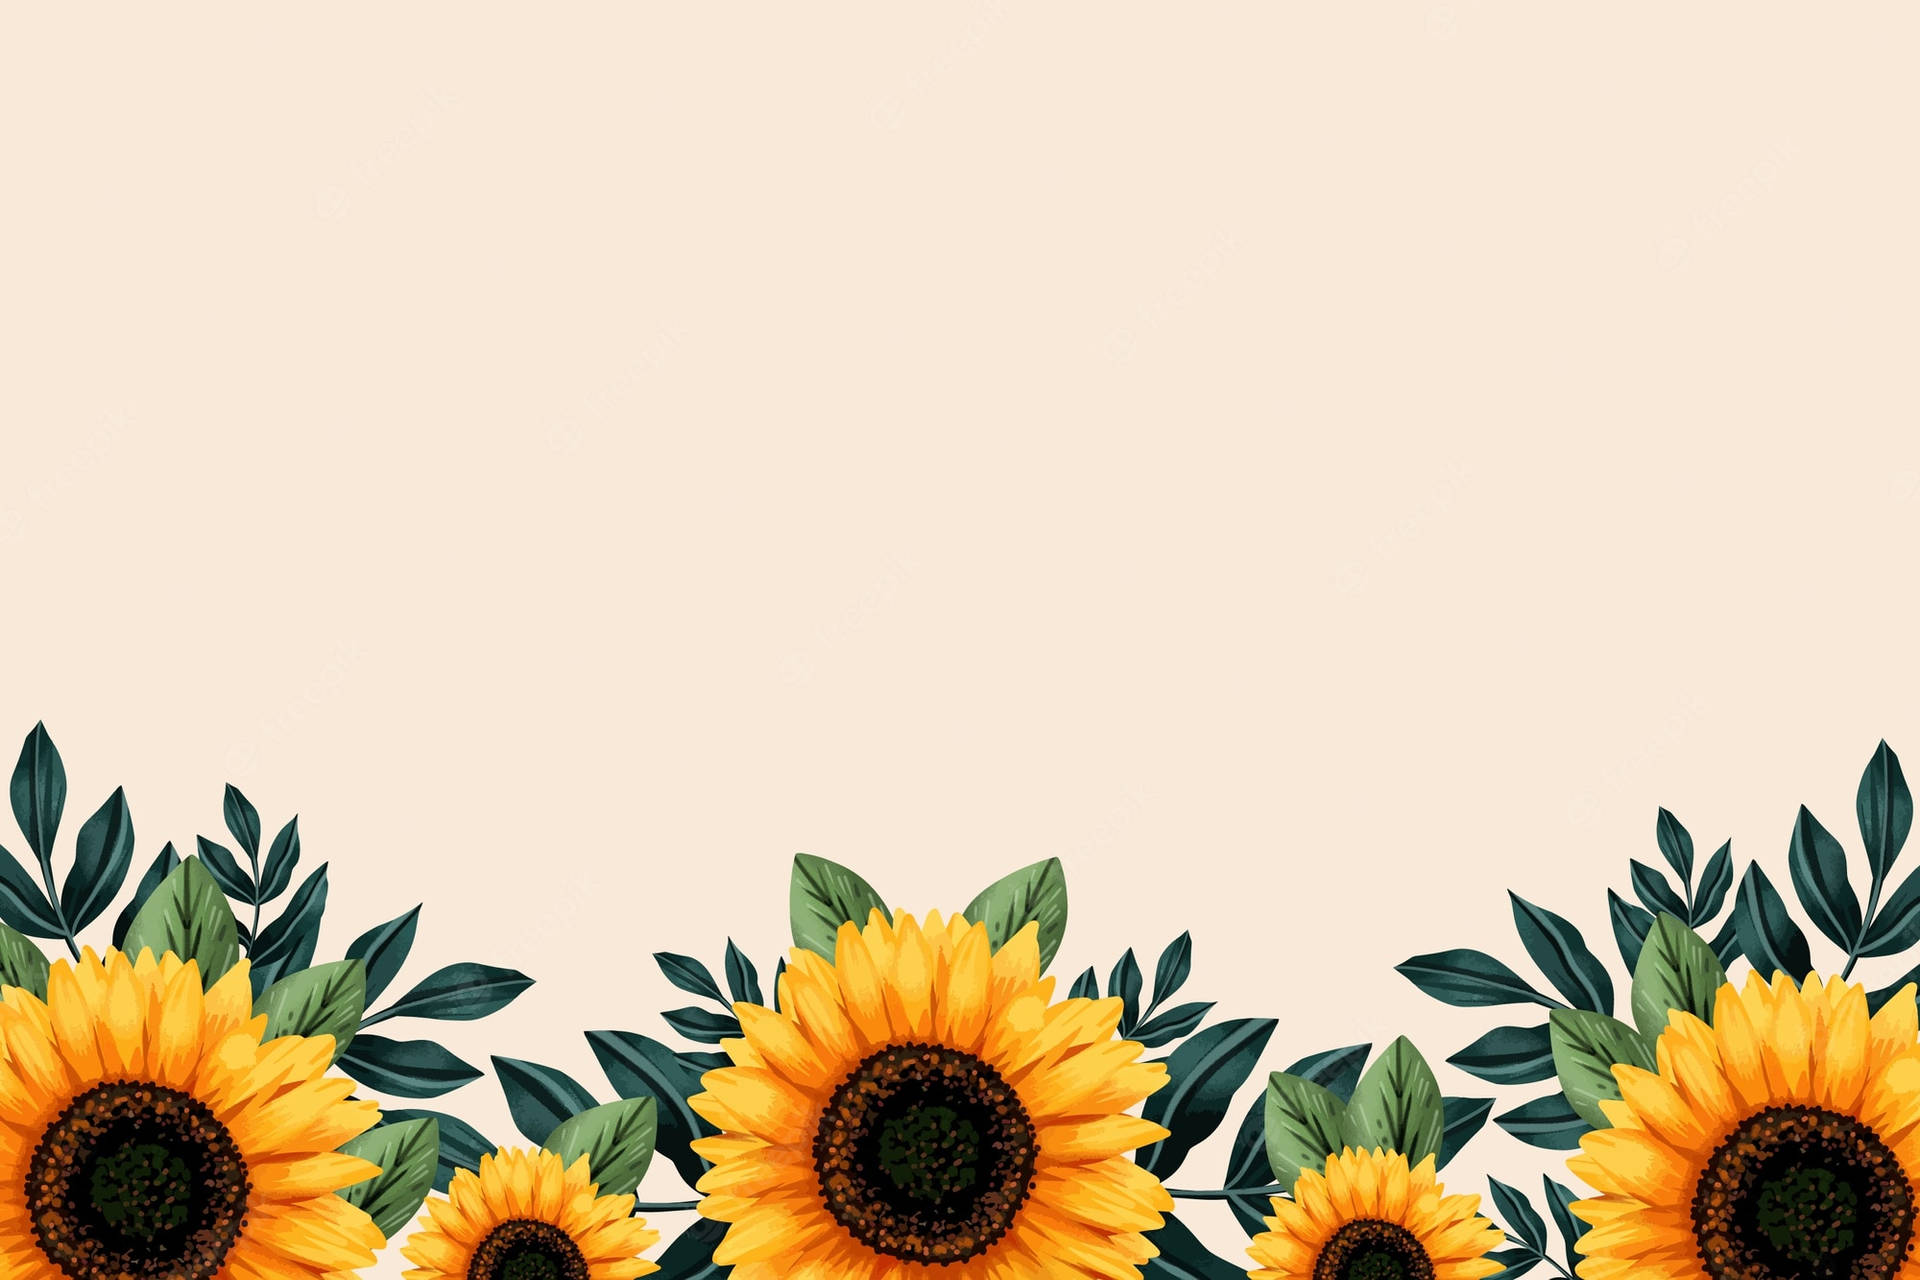 Vibrant Sunflowers and Roses Adorn This Gorgeous Garden Wallpaper